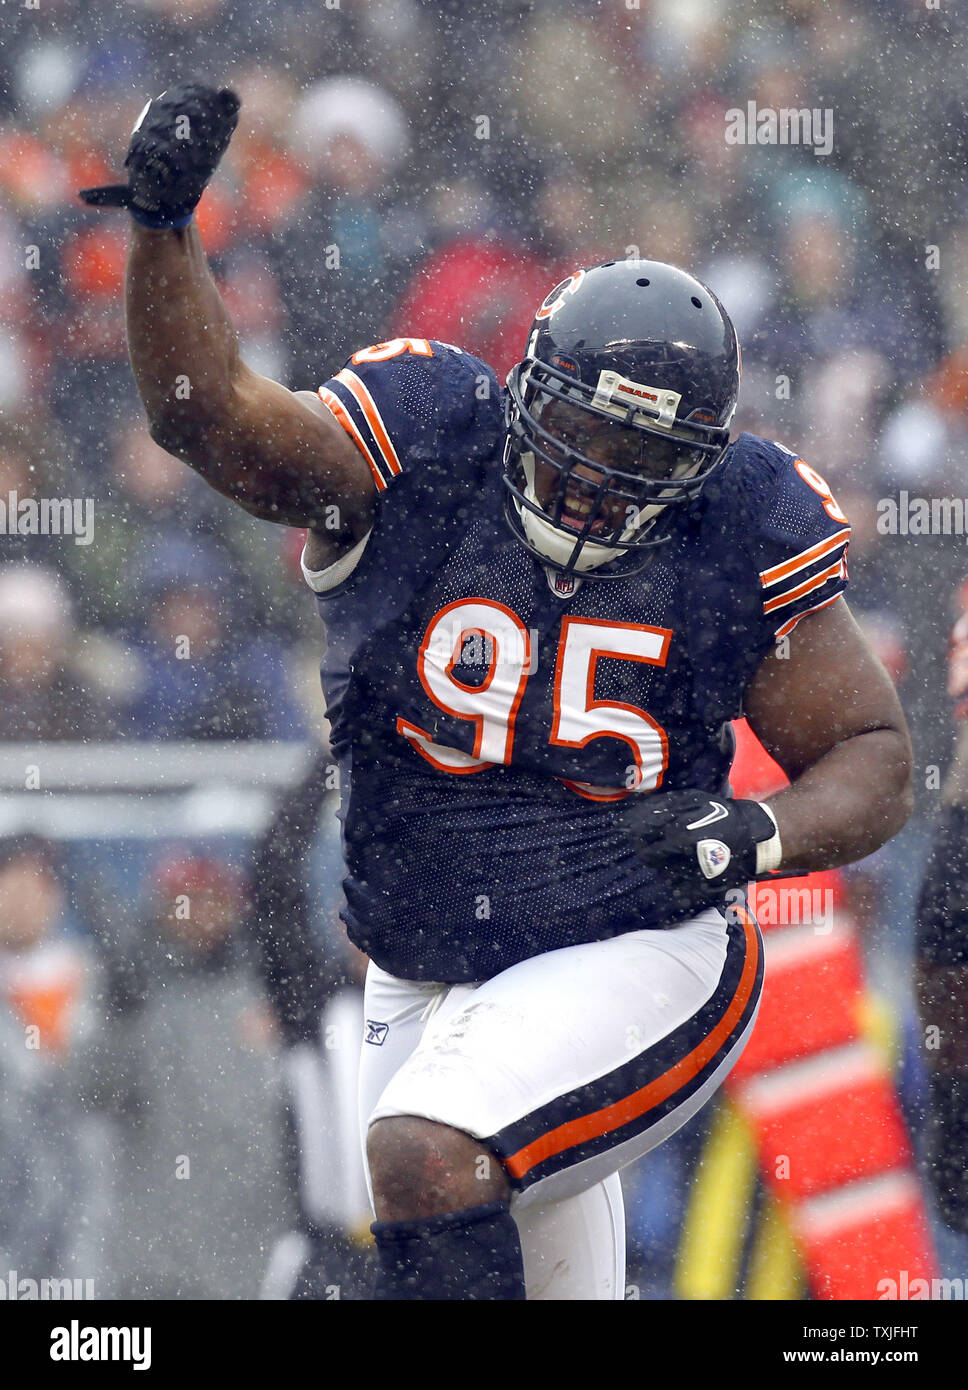 Chicago Bears defensive tackle Anthony Adams (95) celebrates forcing a  fumble against the New York Jets during the first quarter of their game at  Soldier Field in Chicago on December 26, 2010.